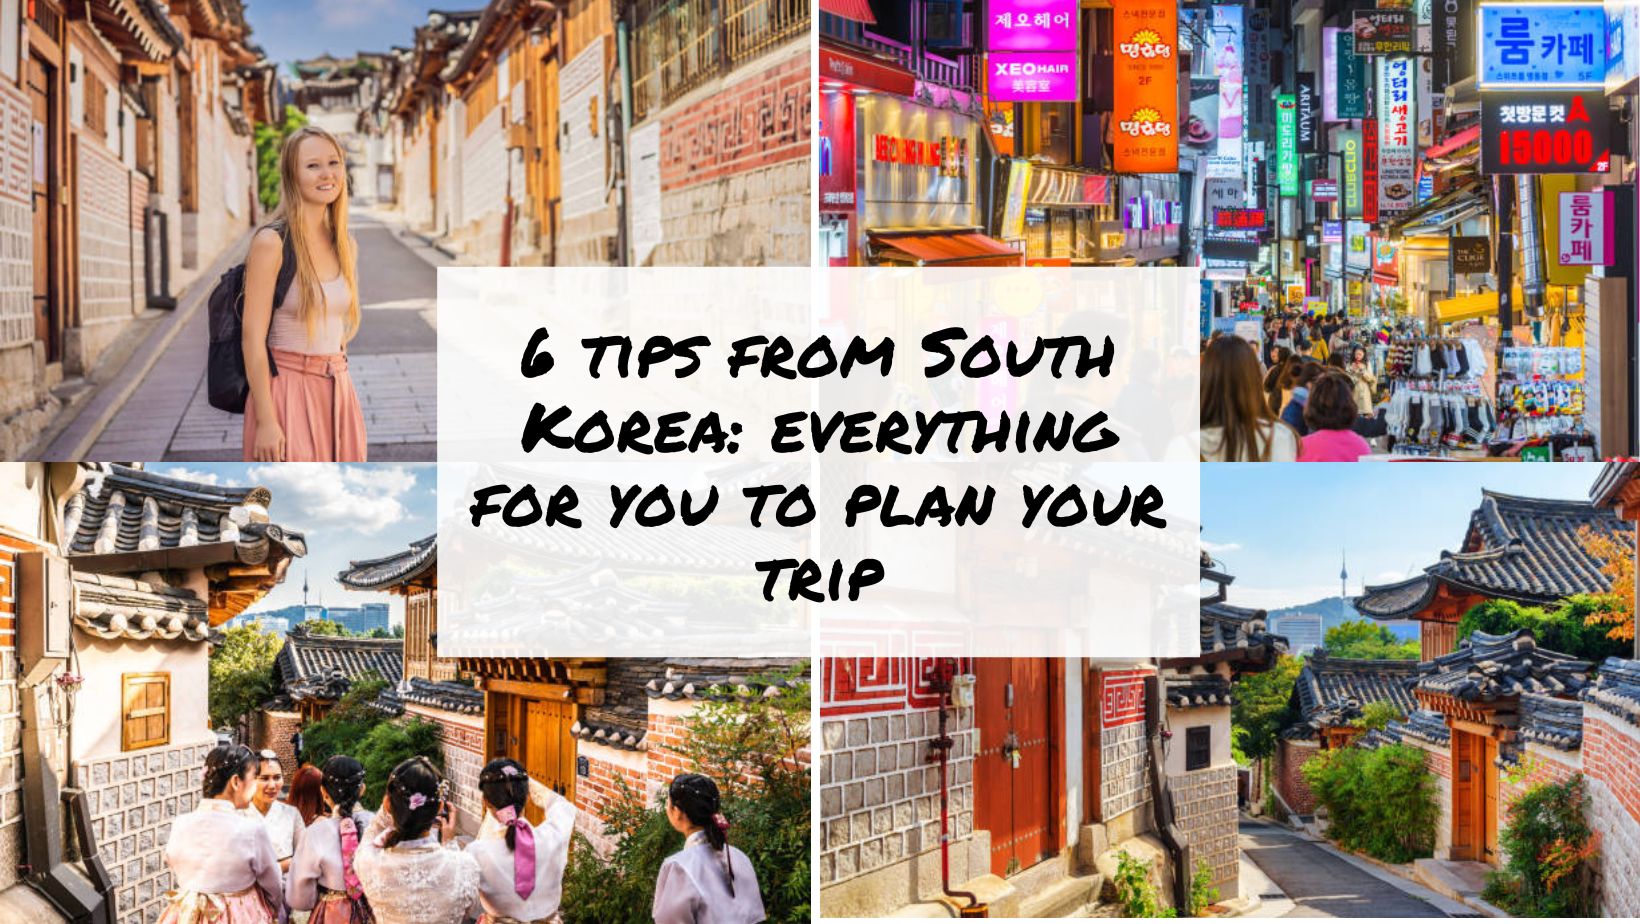 6 tips from South Korea everything for you to plan your trip